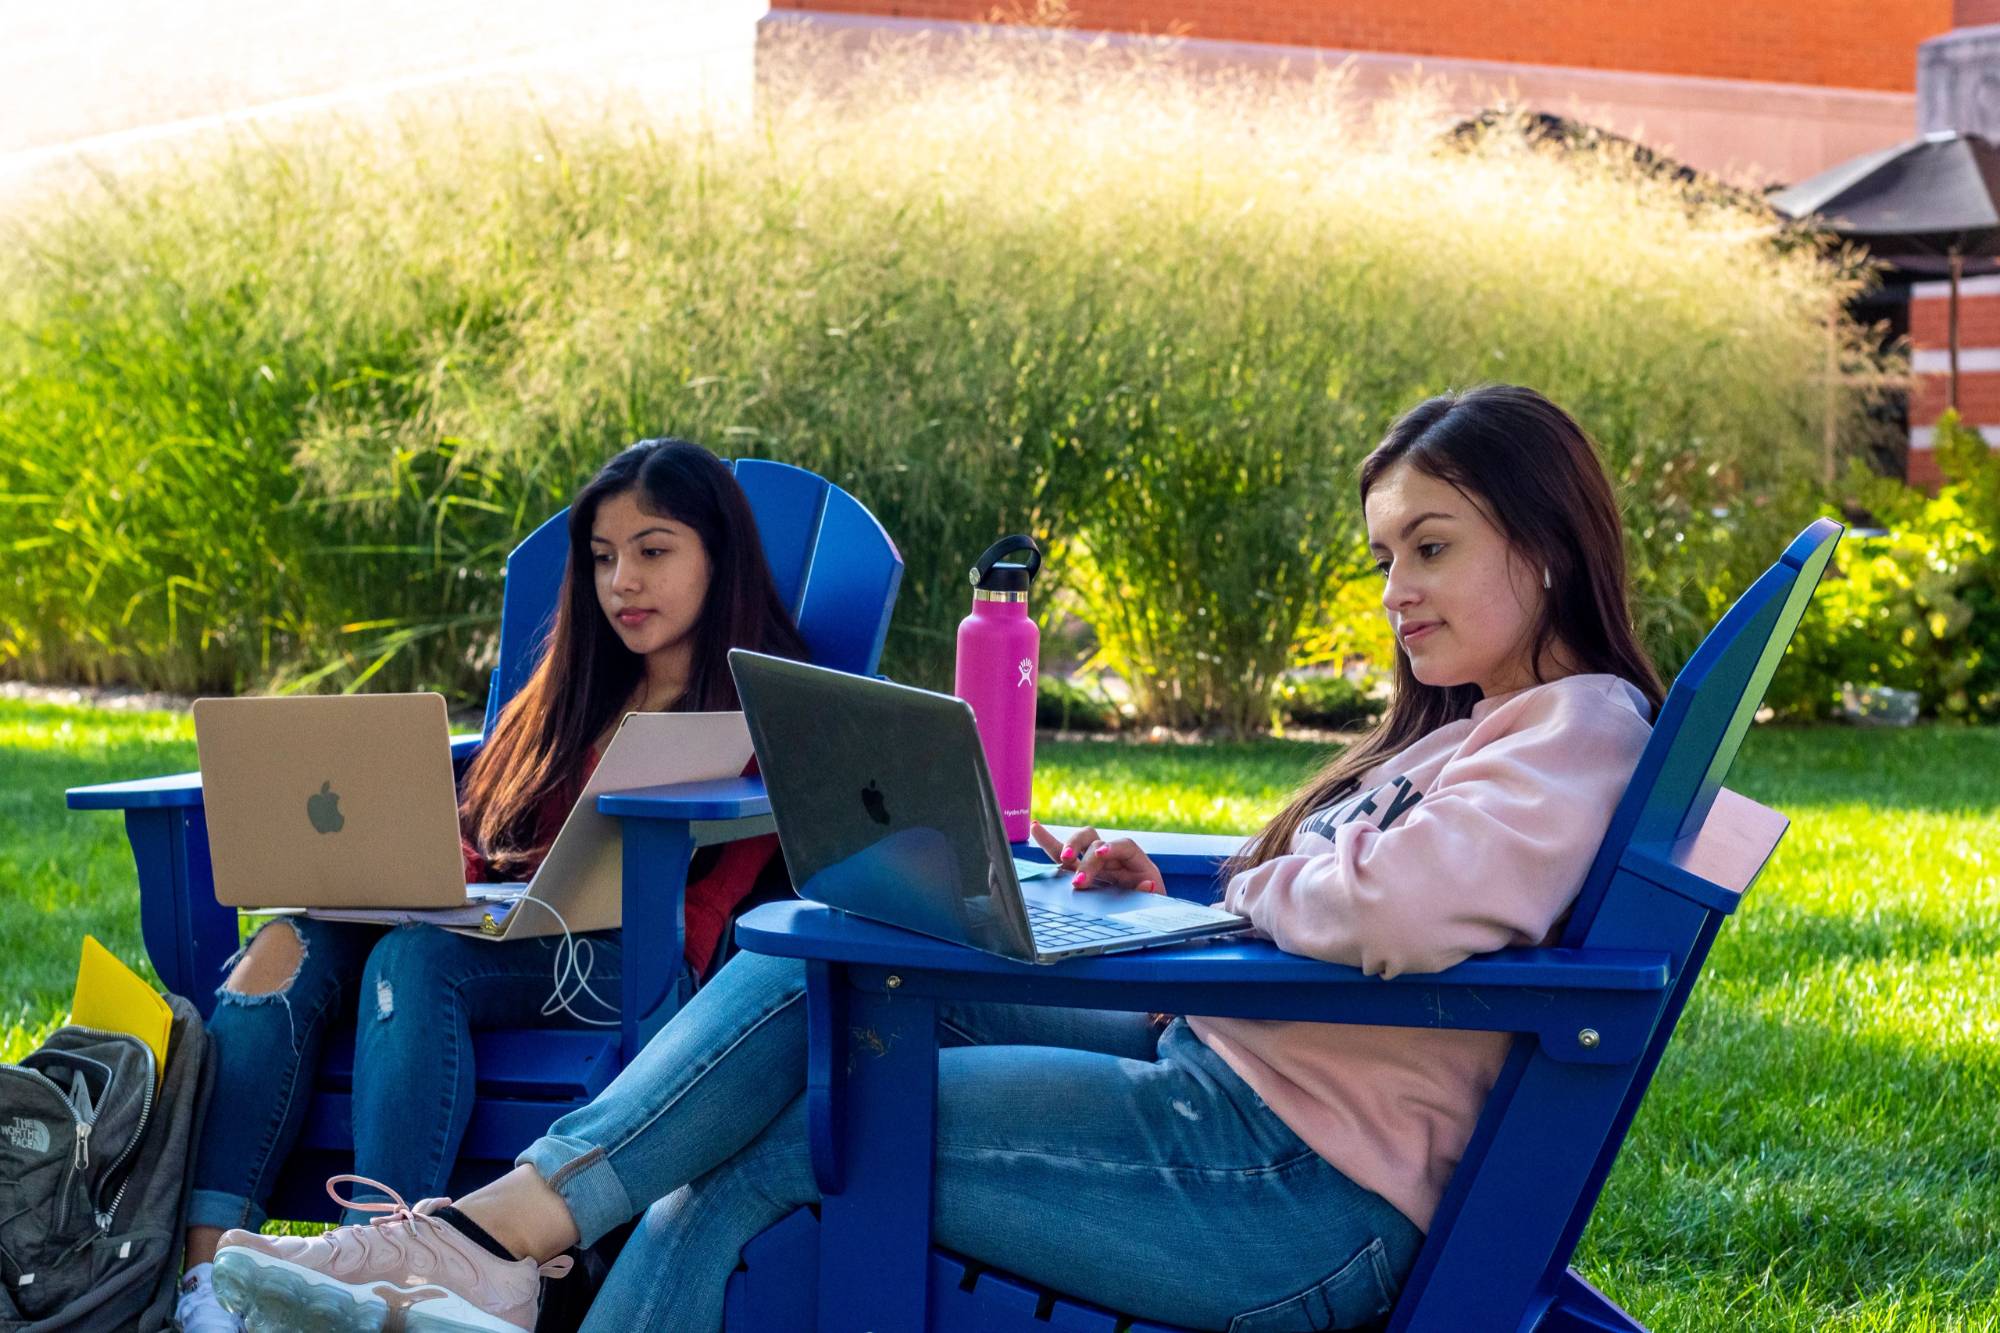 students lounging in deck chairs outside on campus lawn